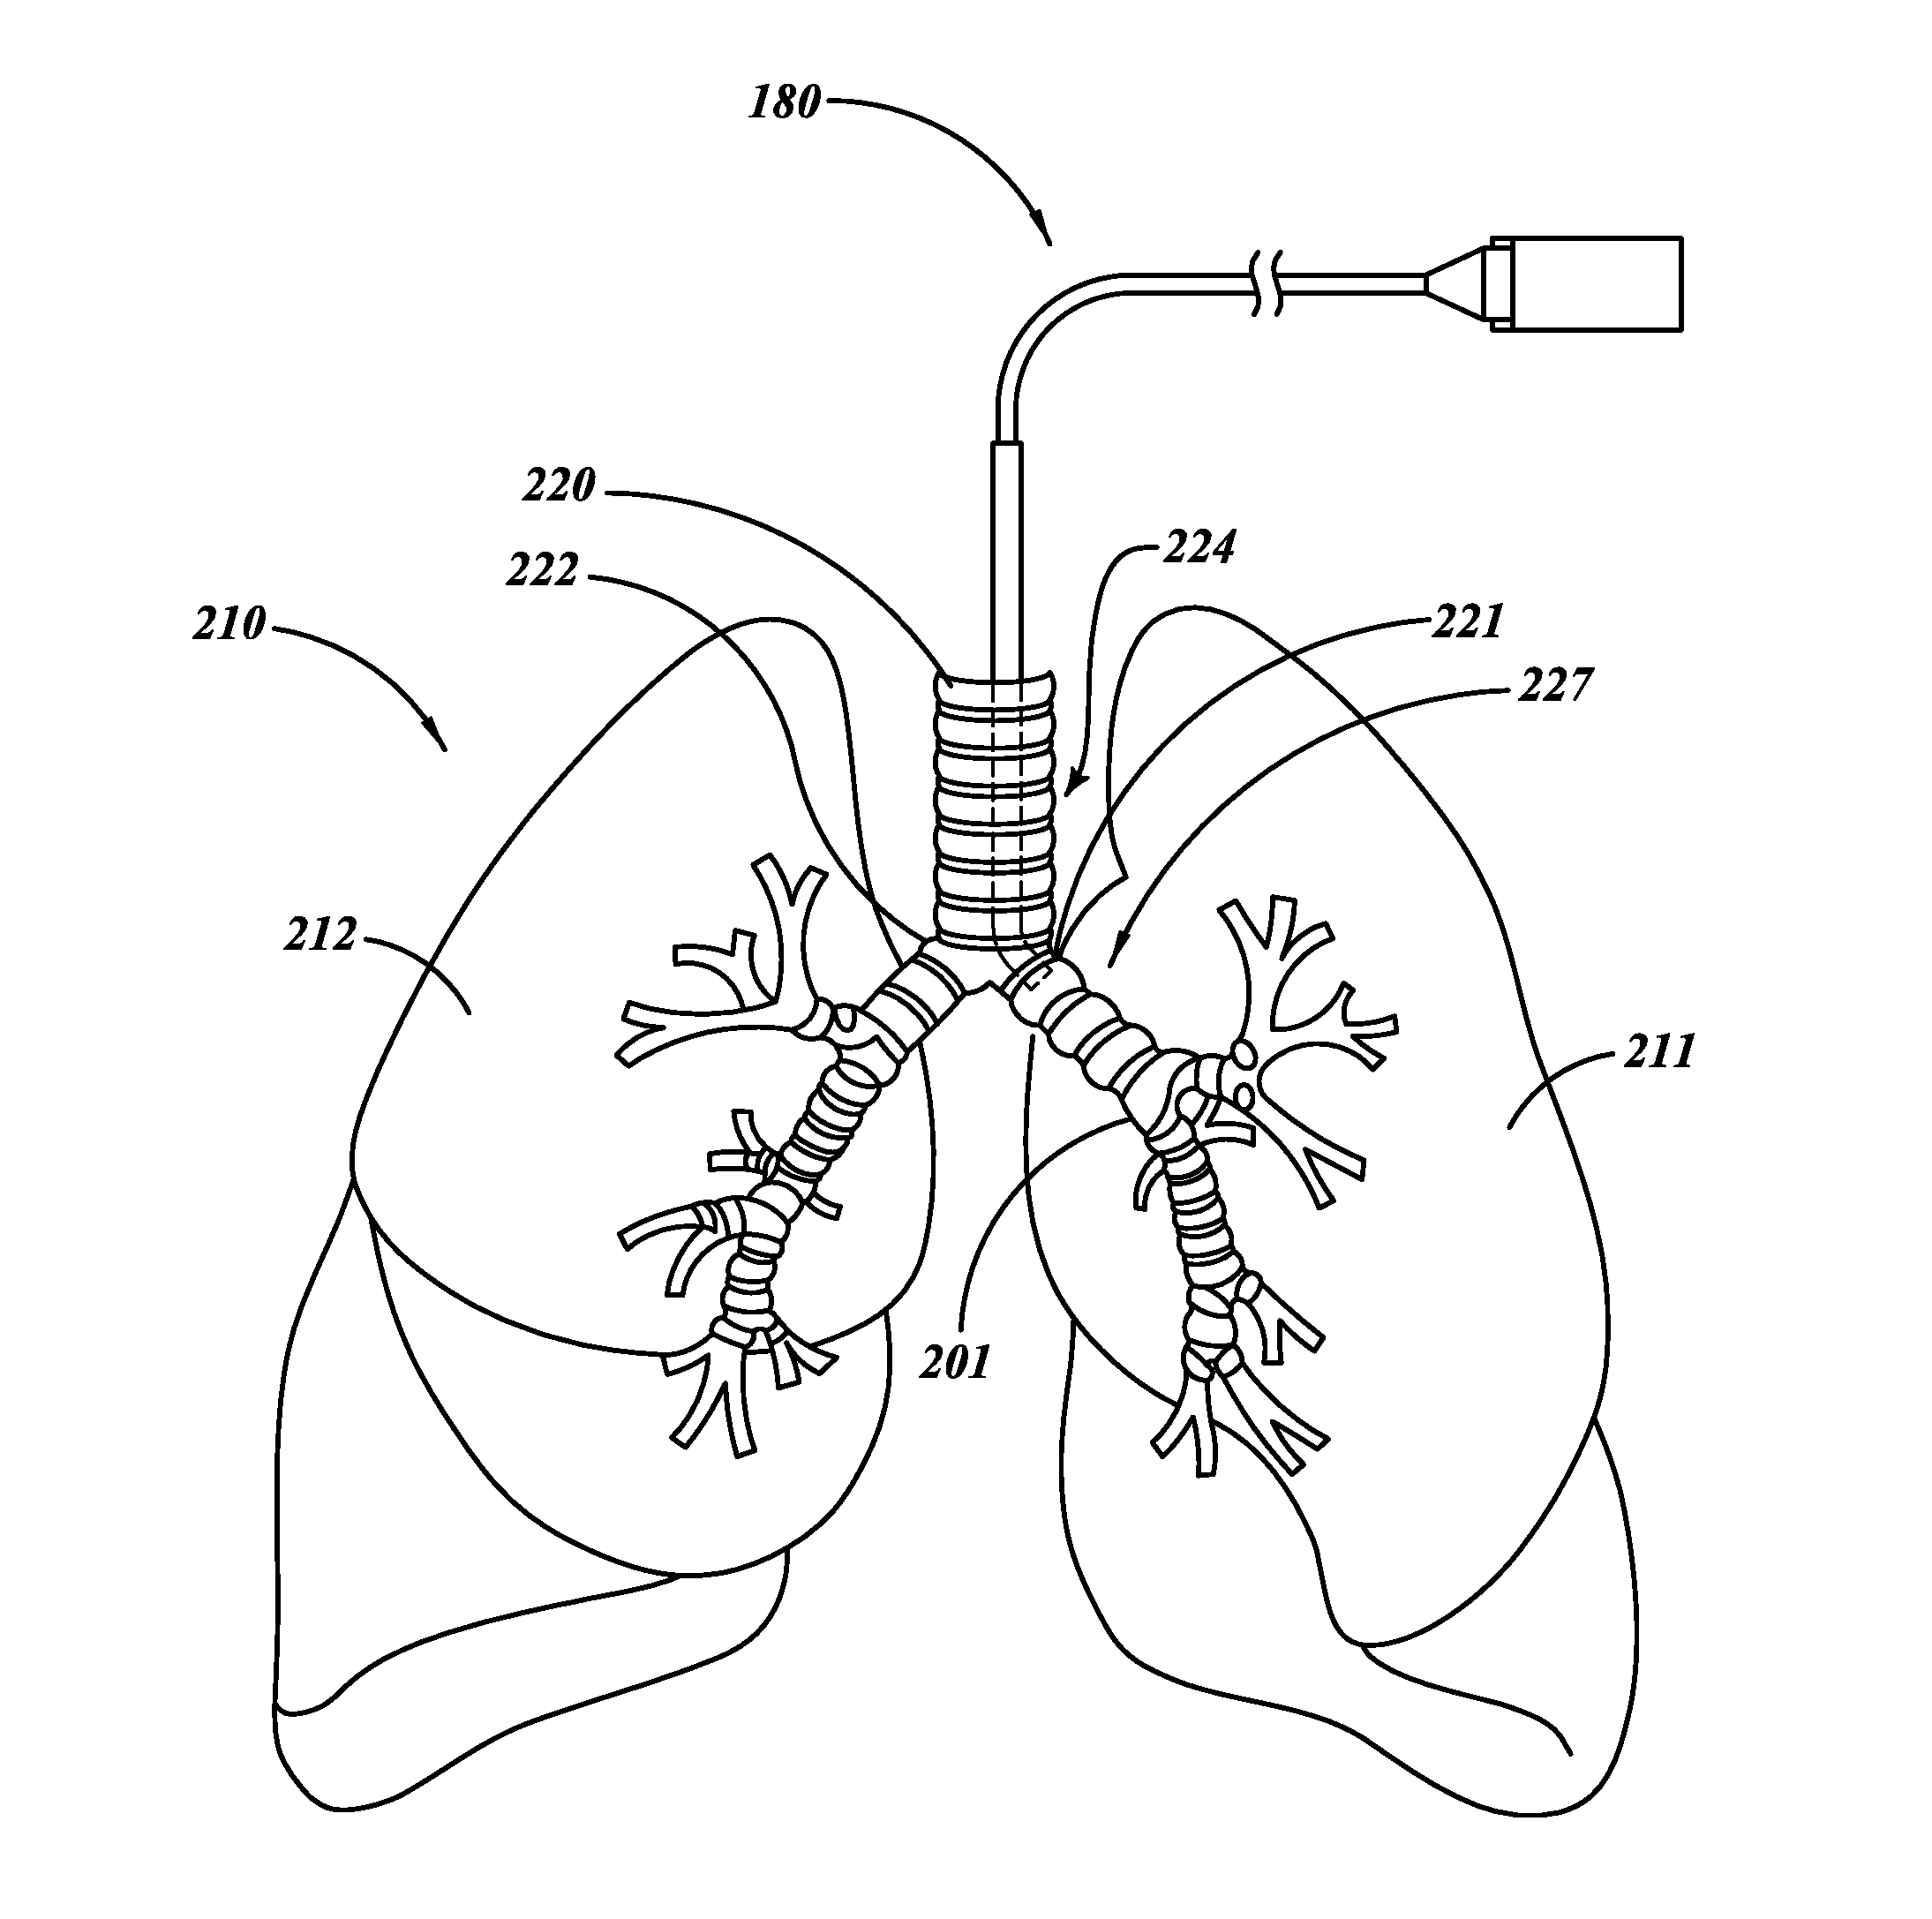 Methods and systems for screening subjects